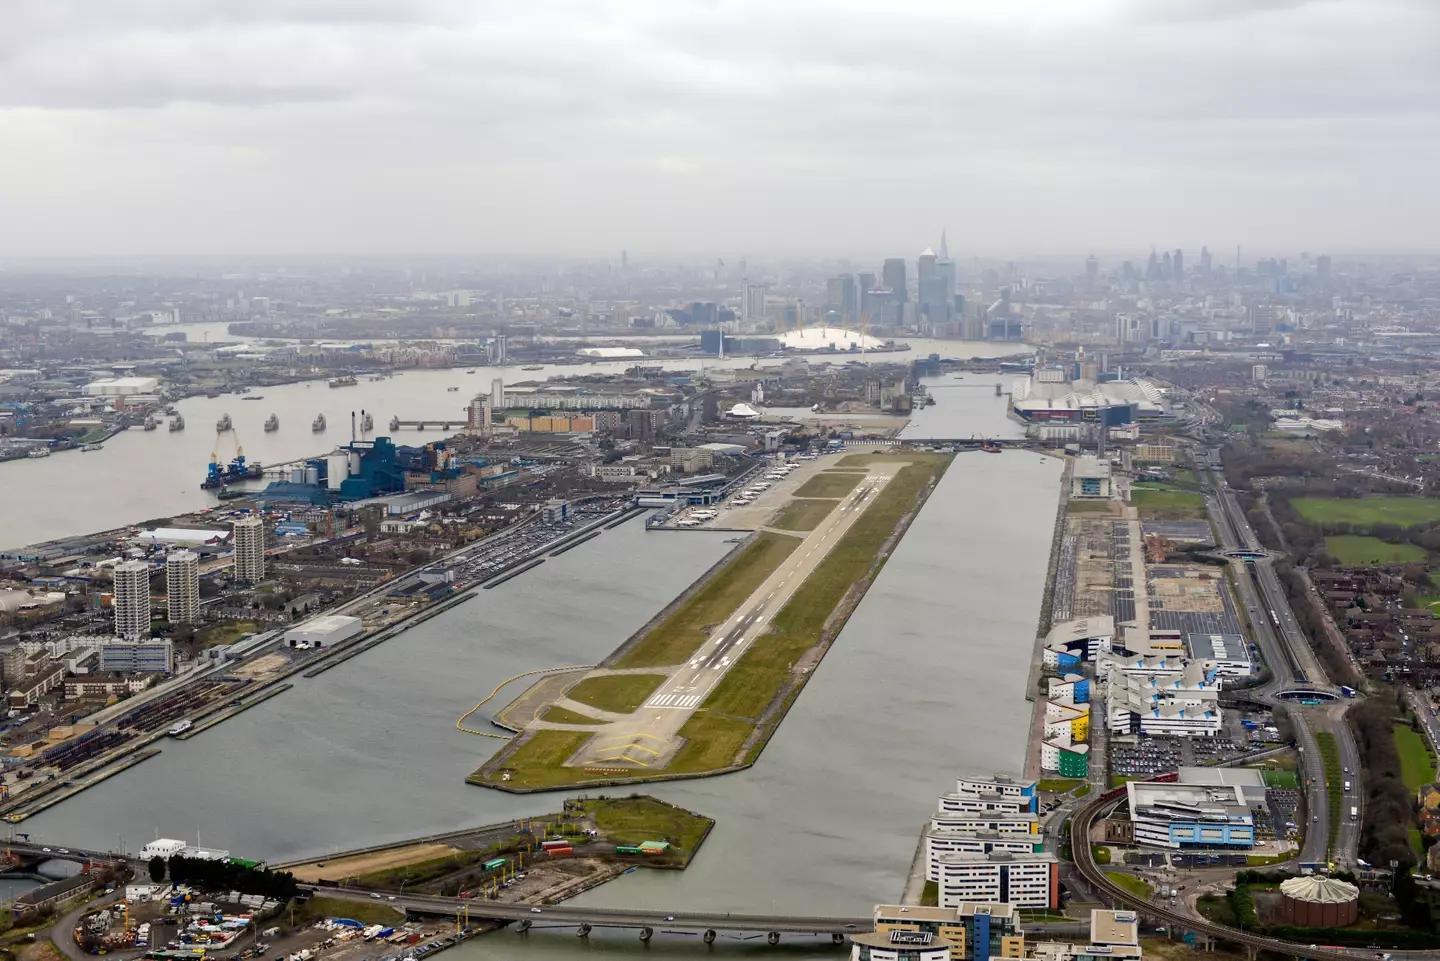 You'll be through the queues in no time at London City Airport.